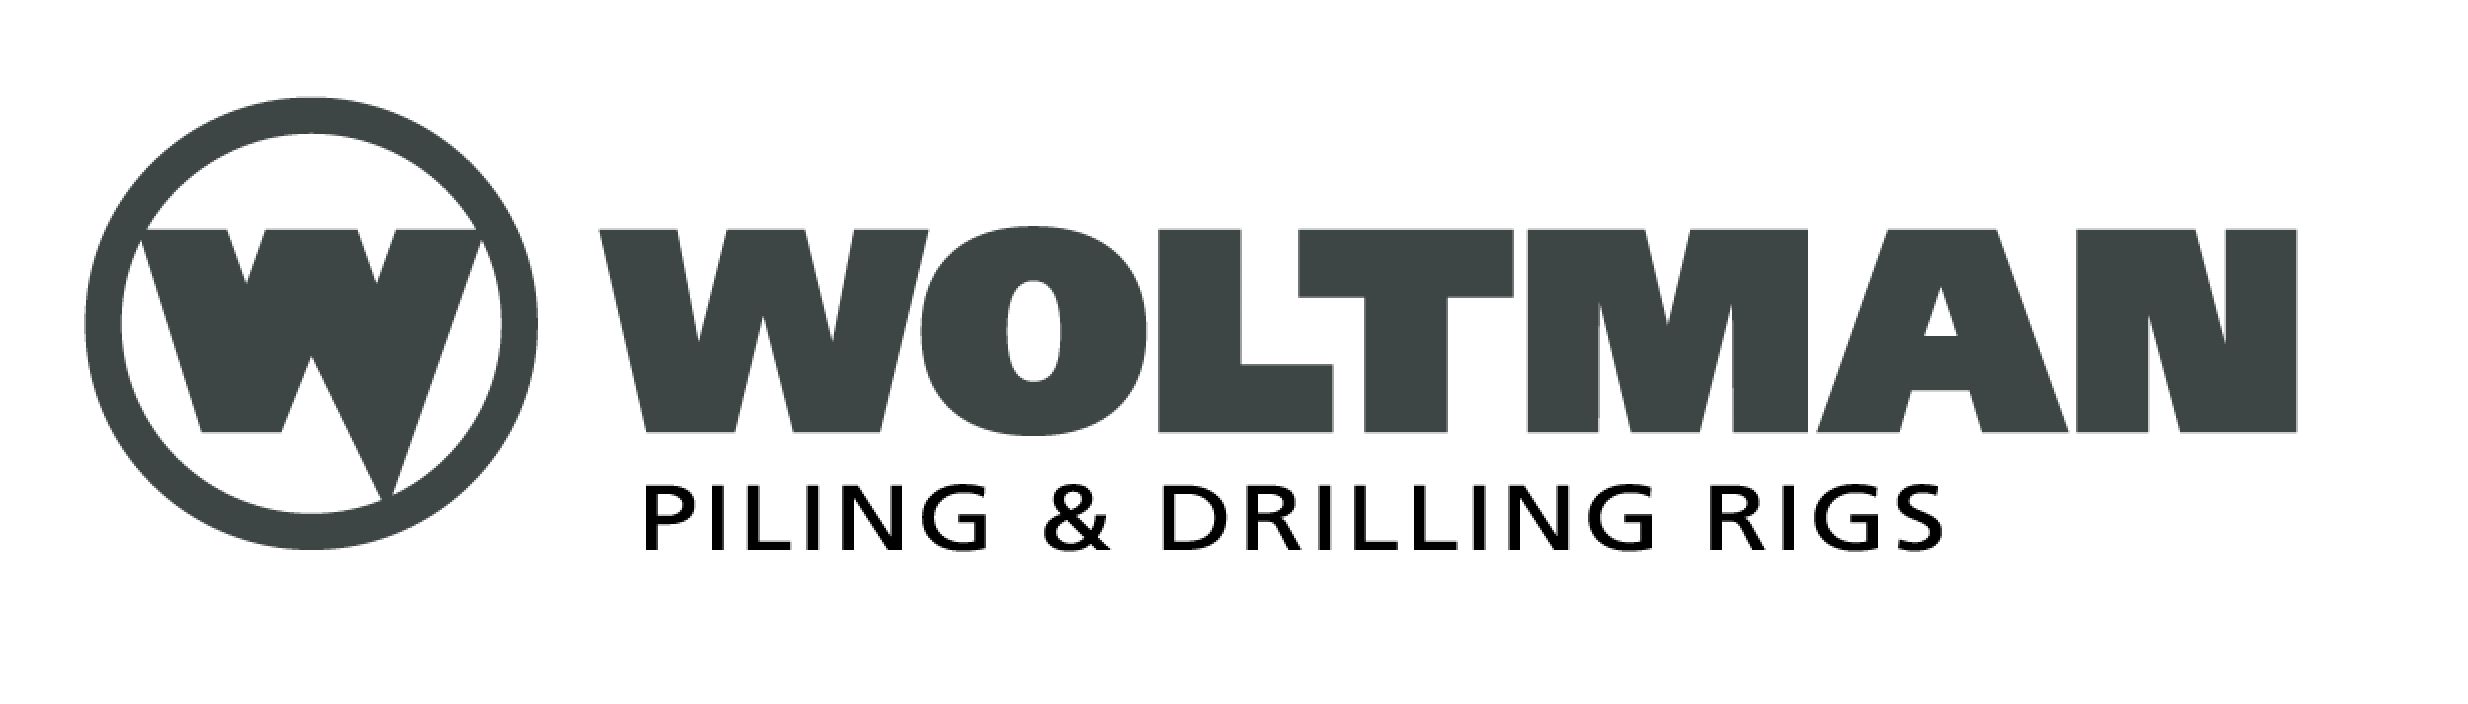 WOLTMAN PILING&DRILING RIGS